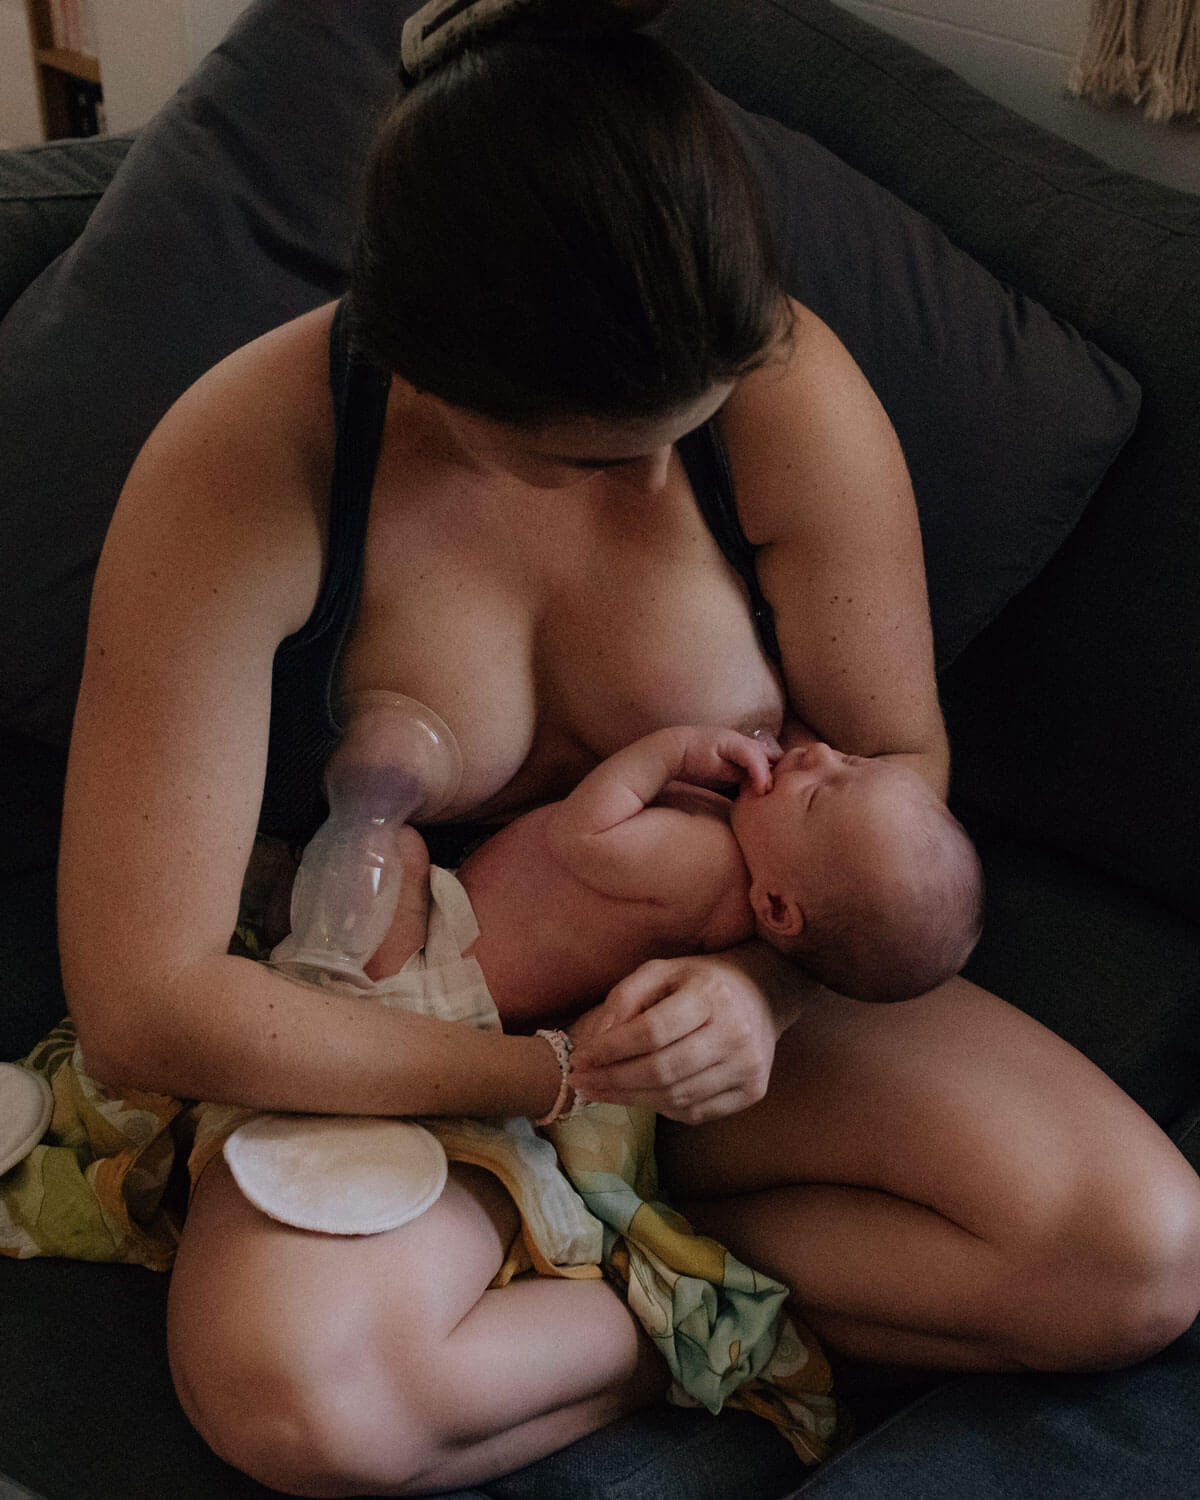 woman breastfeeding and pumping